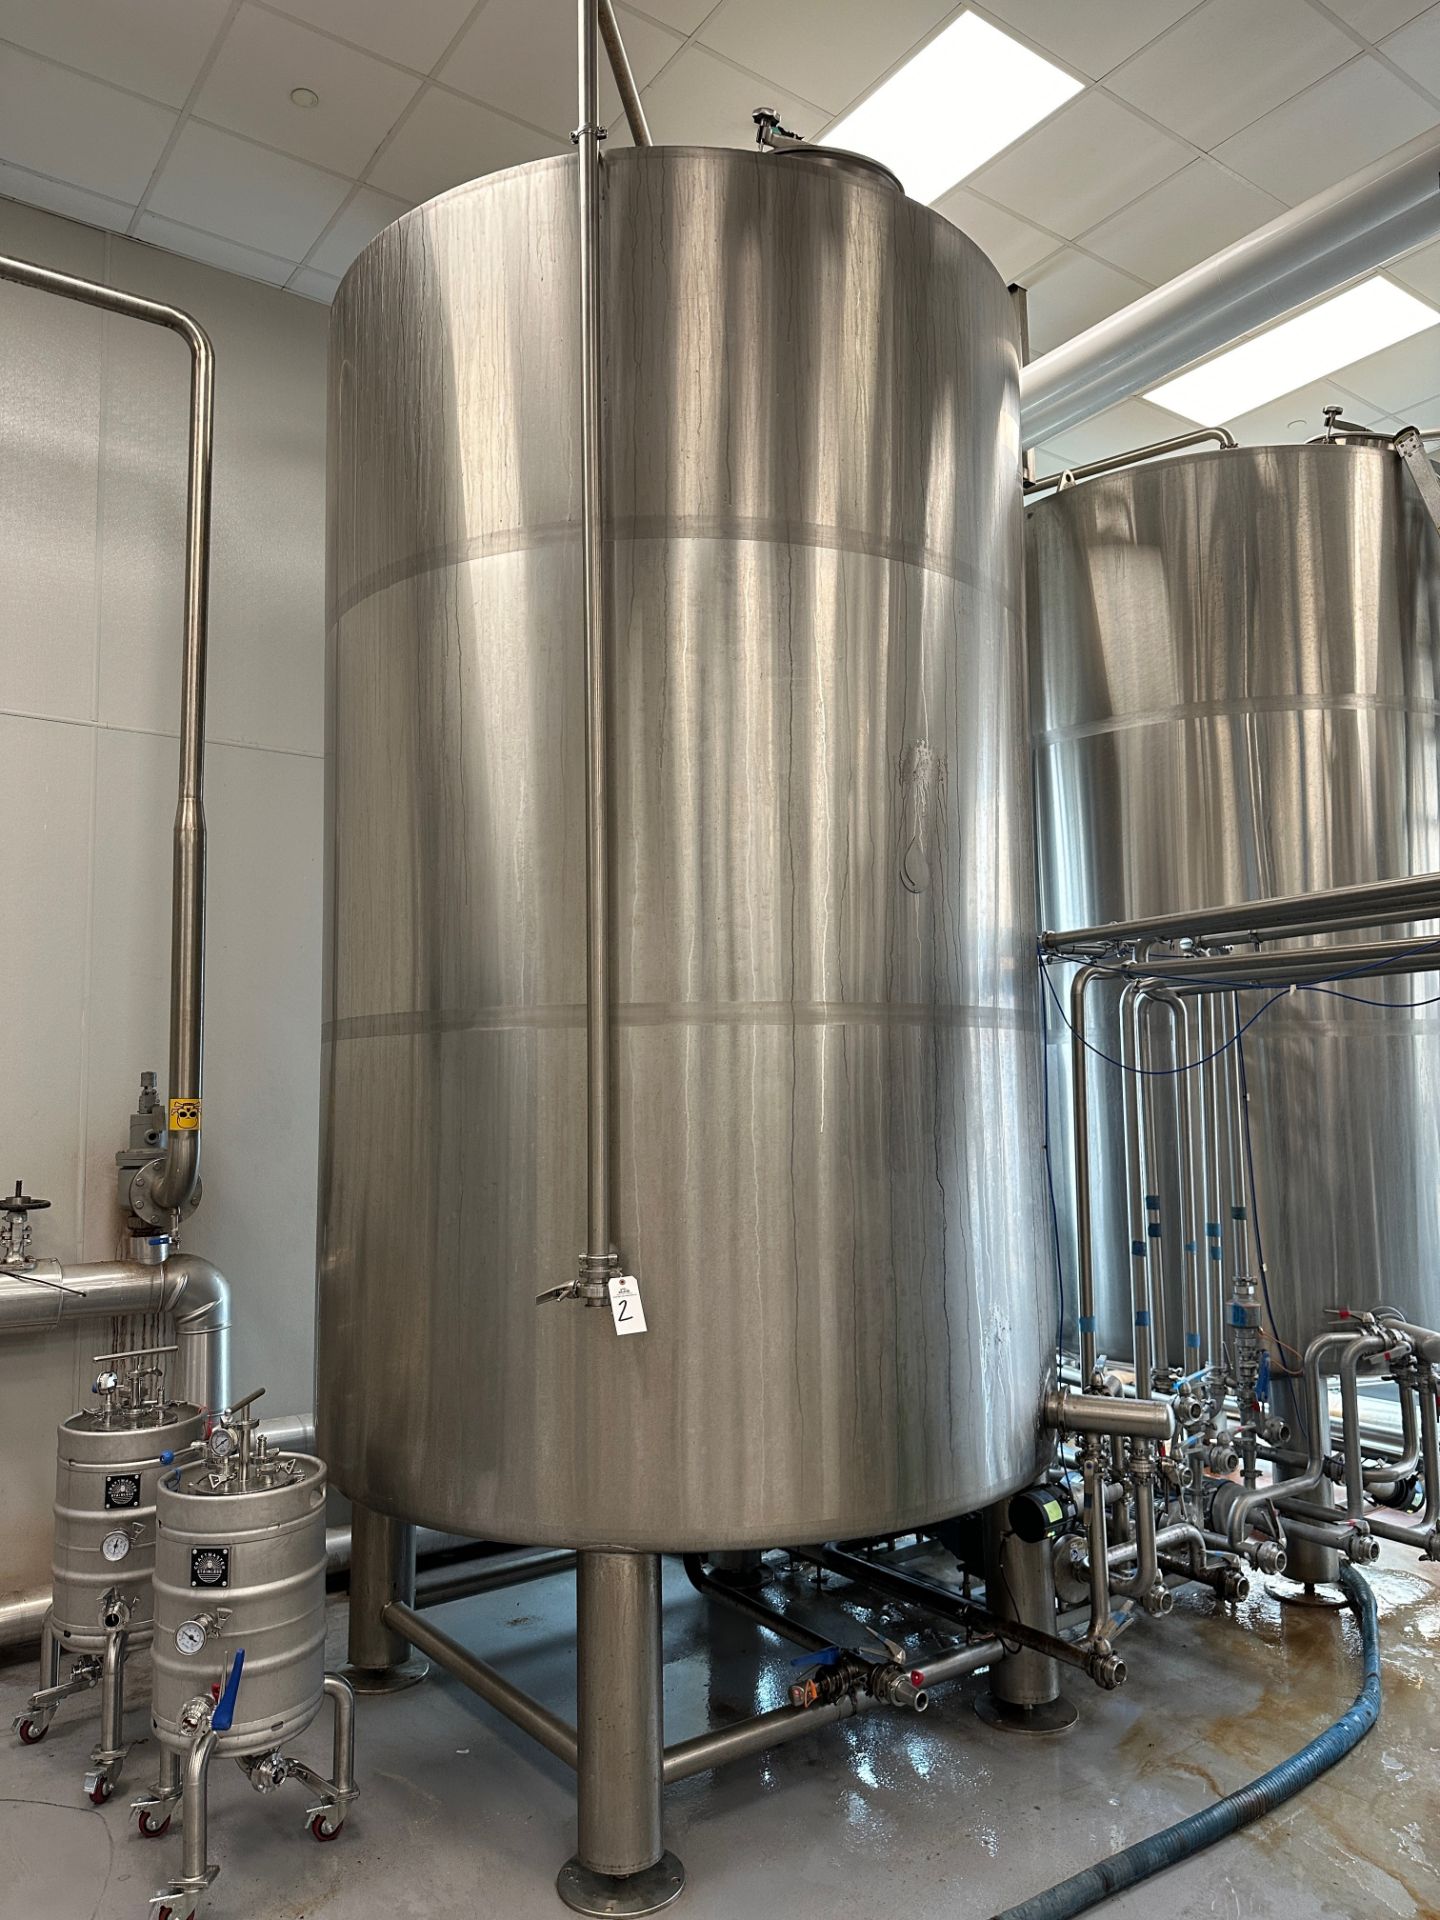 Complete 40 BBL Microbrewery - 40 BBL Deutsche 4-Vessel Brewhouse, Tanks, Can Line - See Description - Image 24 of 335